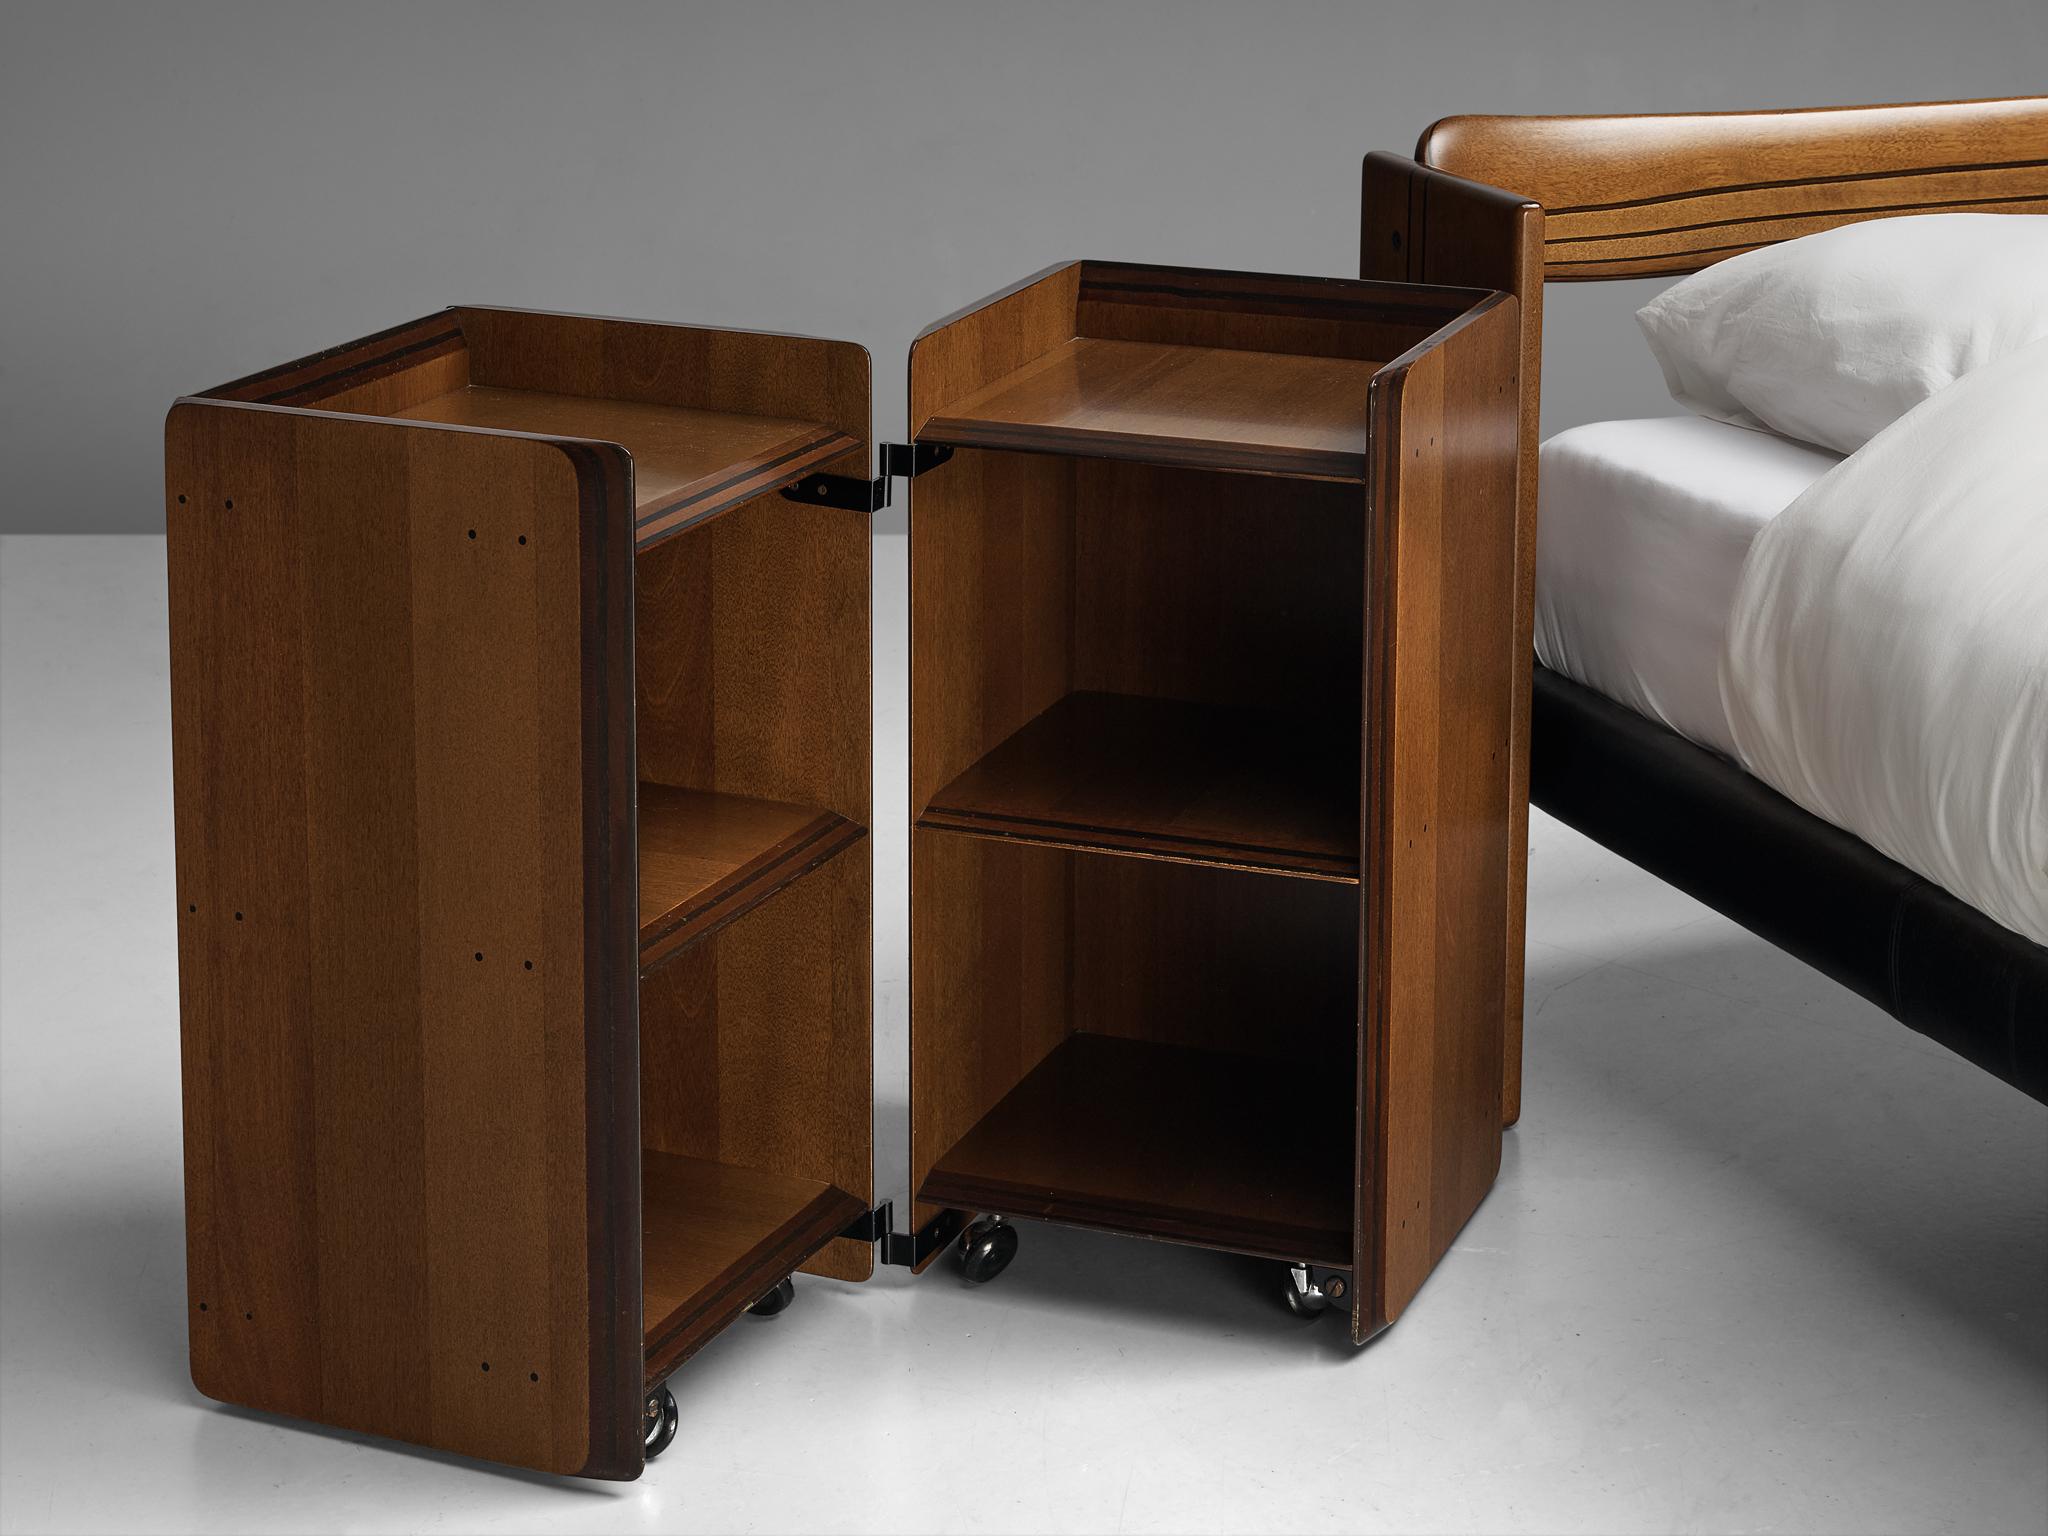 Italian Private listing for Cassie: Scarpa bed + nightstands